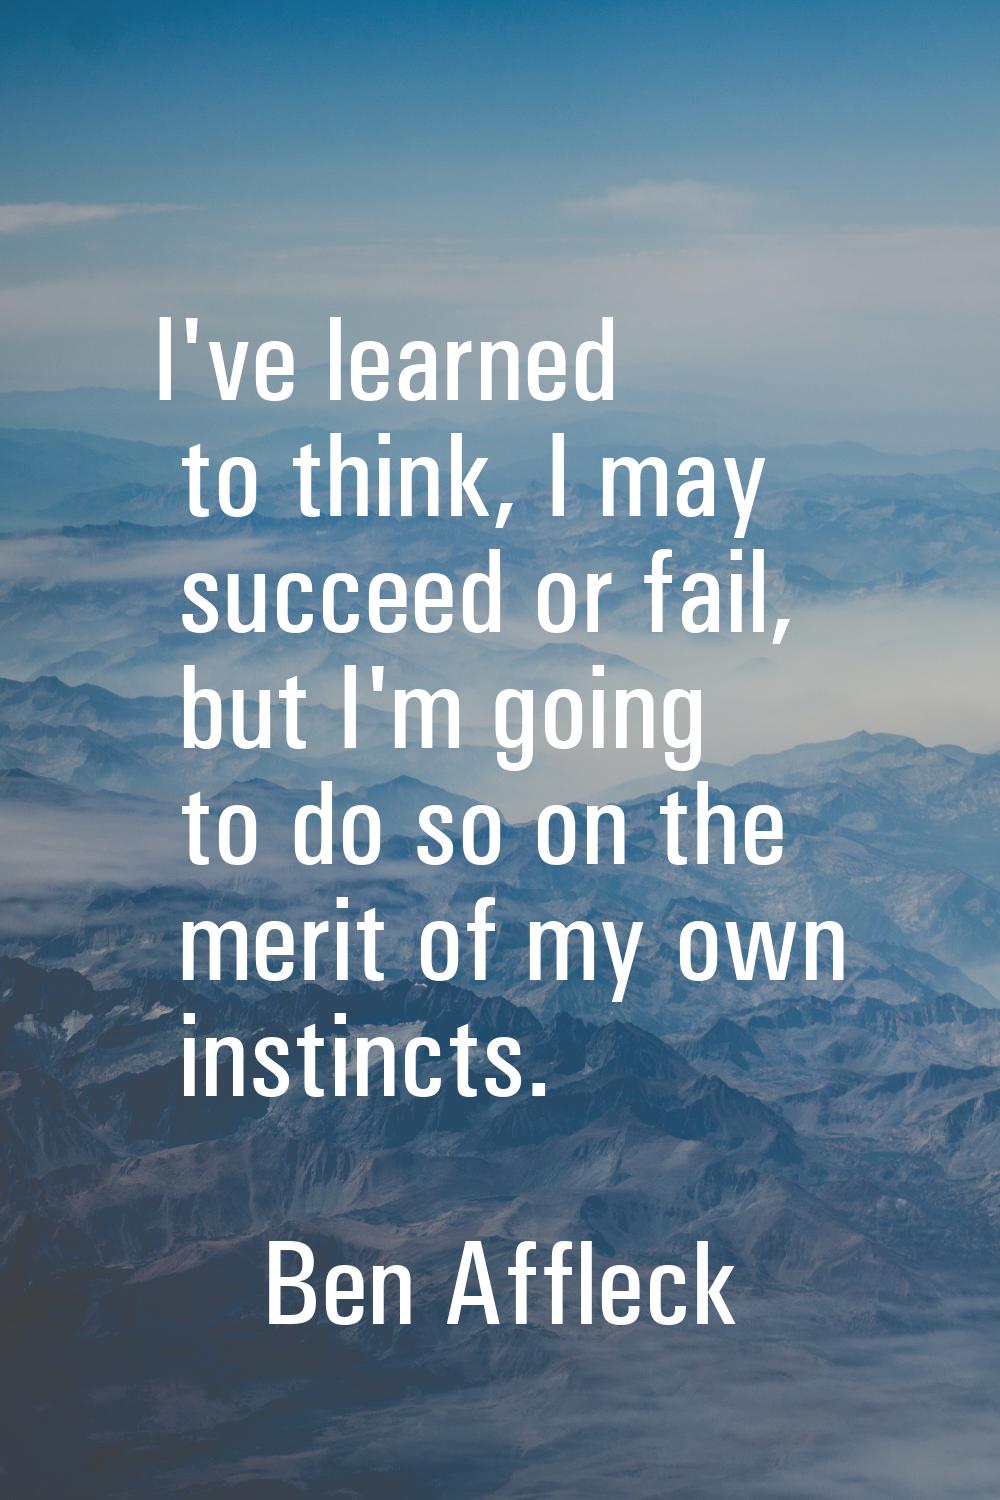 I've learned to think, I may succeed or fail, but I'm going to do so on the merit of my own instinc